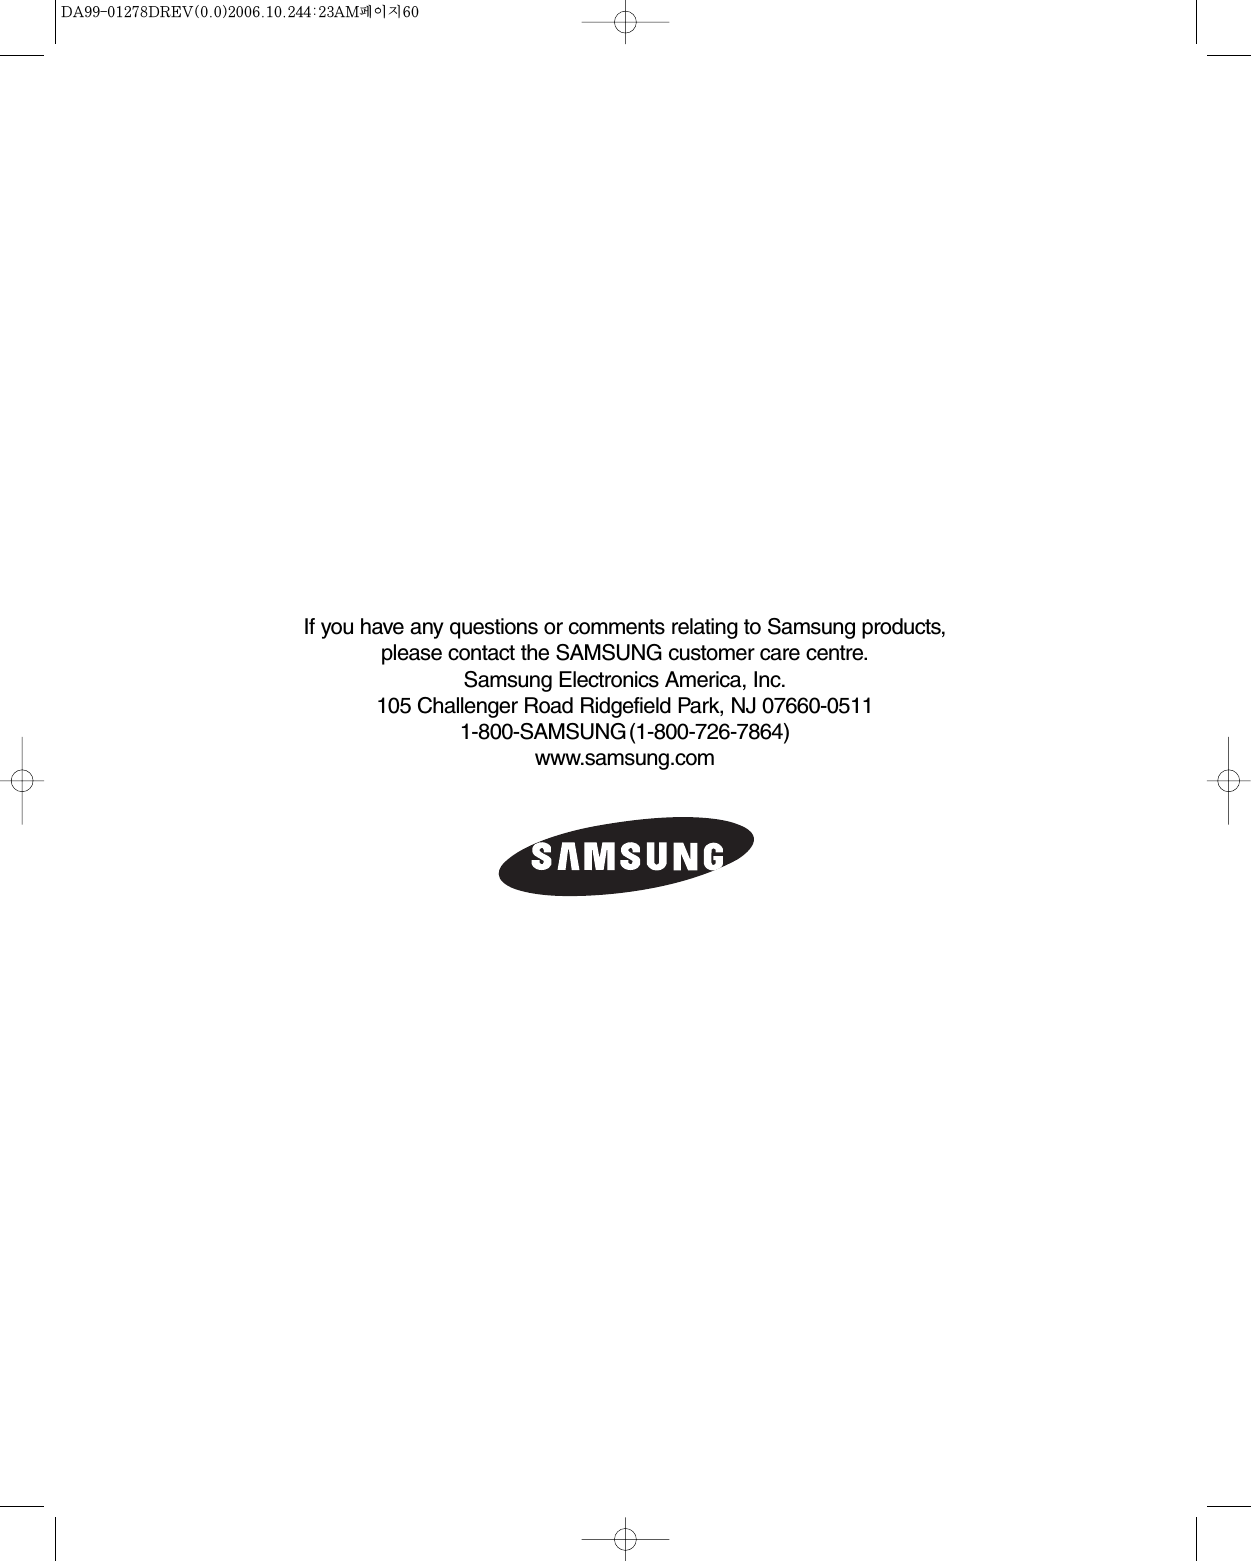 If you have any questions or comments relating to Samsung products,please contact the SAMSUNG customer care centre.Samsung Electronics America, Inc.105 Challenger Road Ridgefield Park, NJ 07660-05111-800-SAMSUNG(1-800-726-7864)www.samsung.com